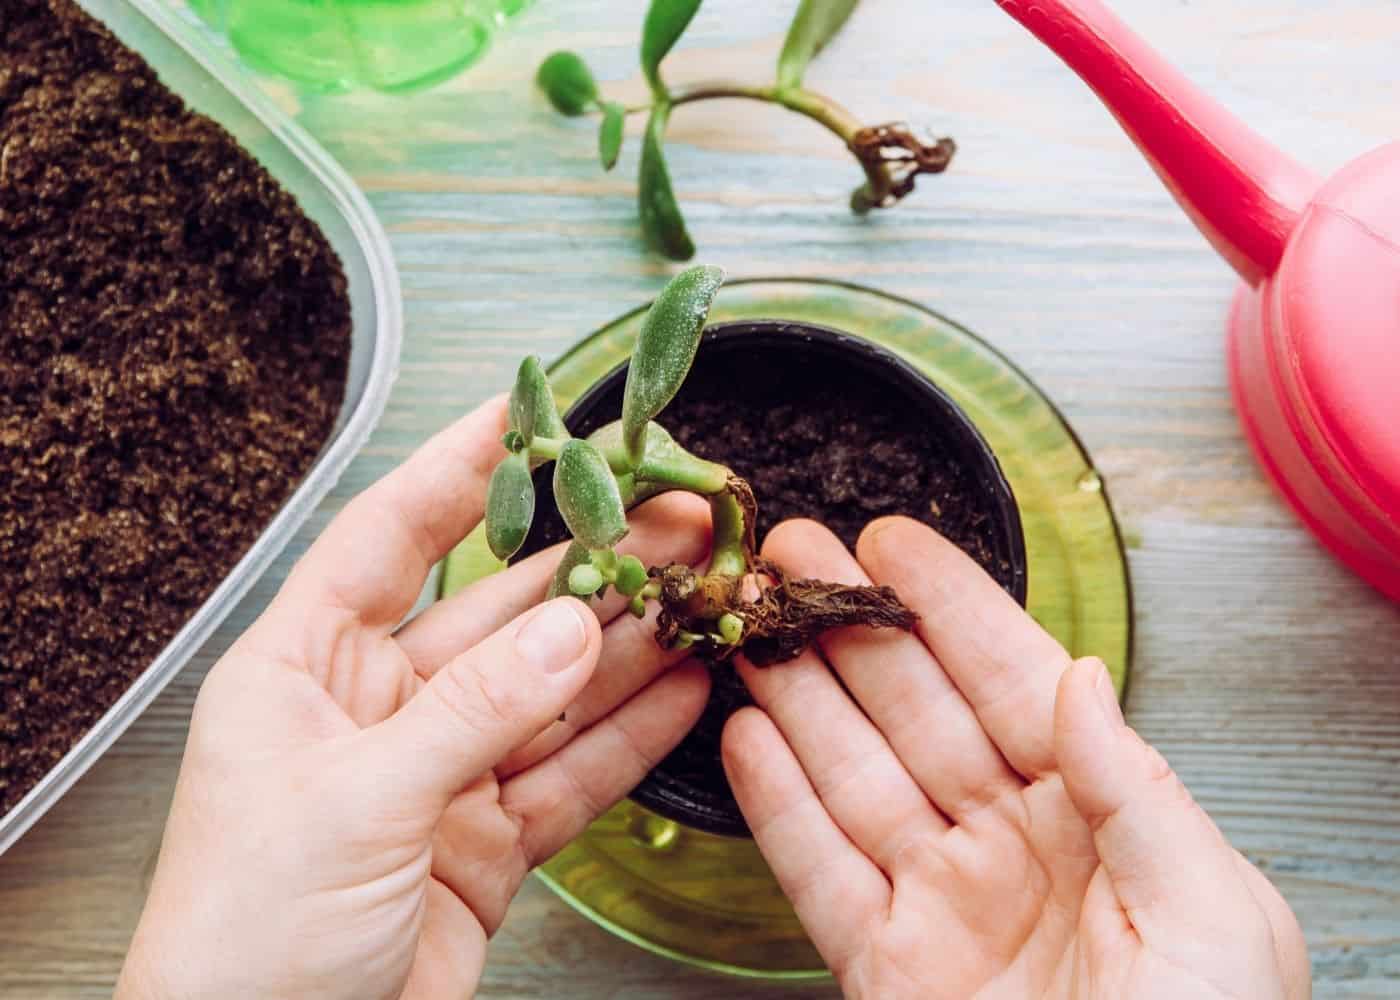 How To Propagate Jade Plant - rooted cutting